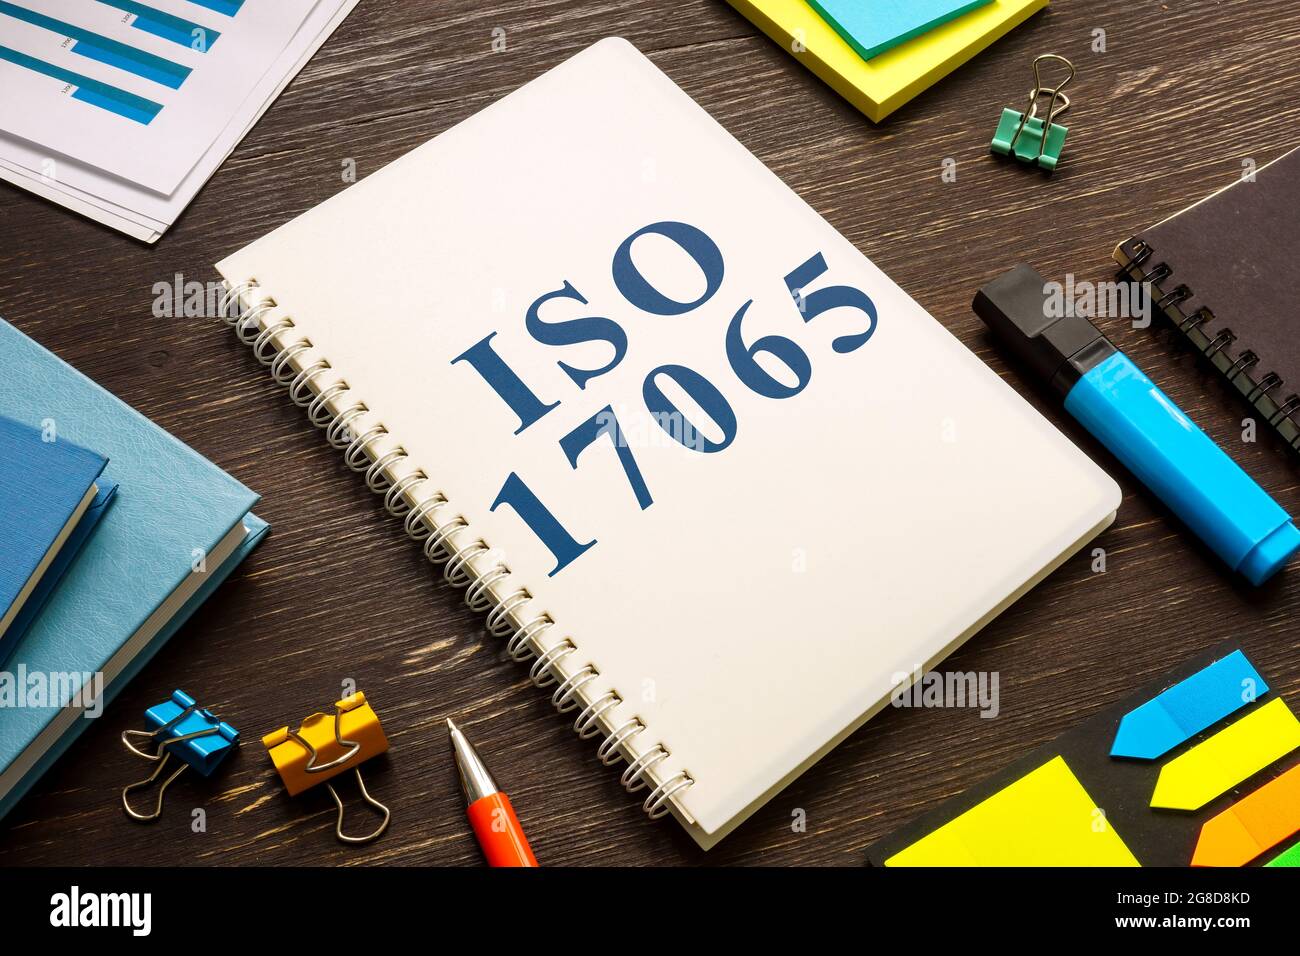 ISO 17065 Conformity assessment requirements in the book. Stock Photo